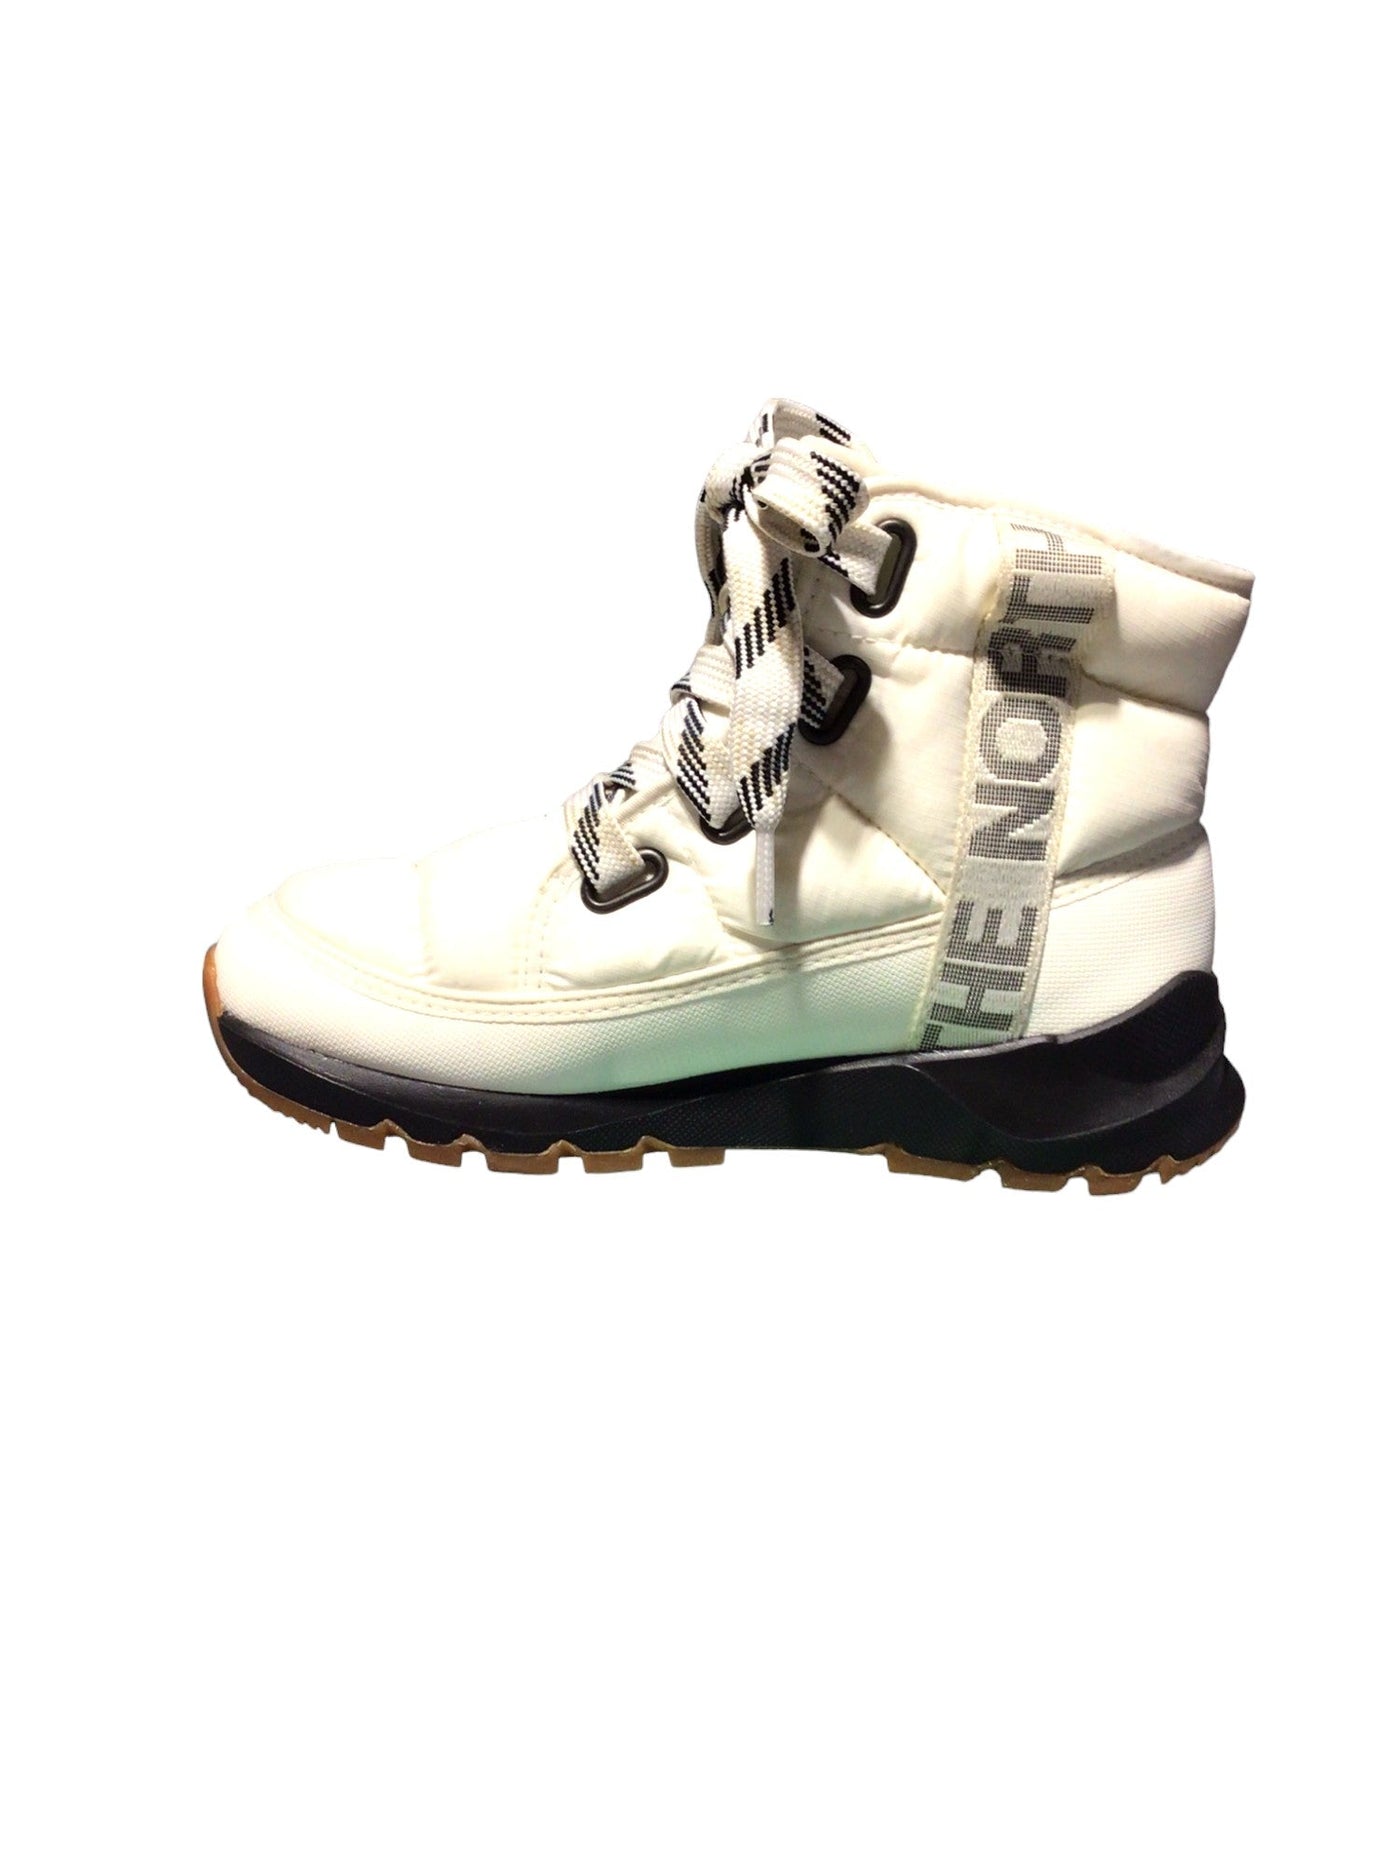 THE NORTH FACE Women Boots Regular fit in White - Size 6 | 30.99 $ KOOP